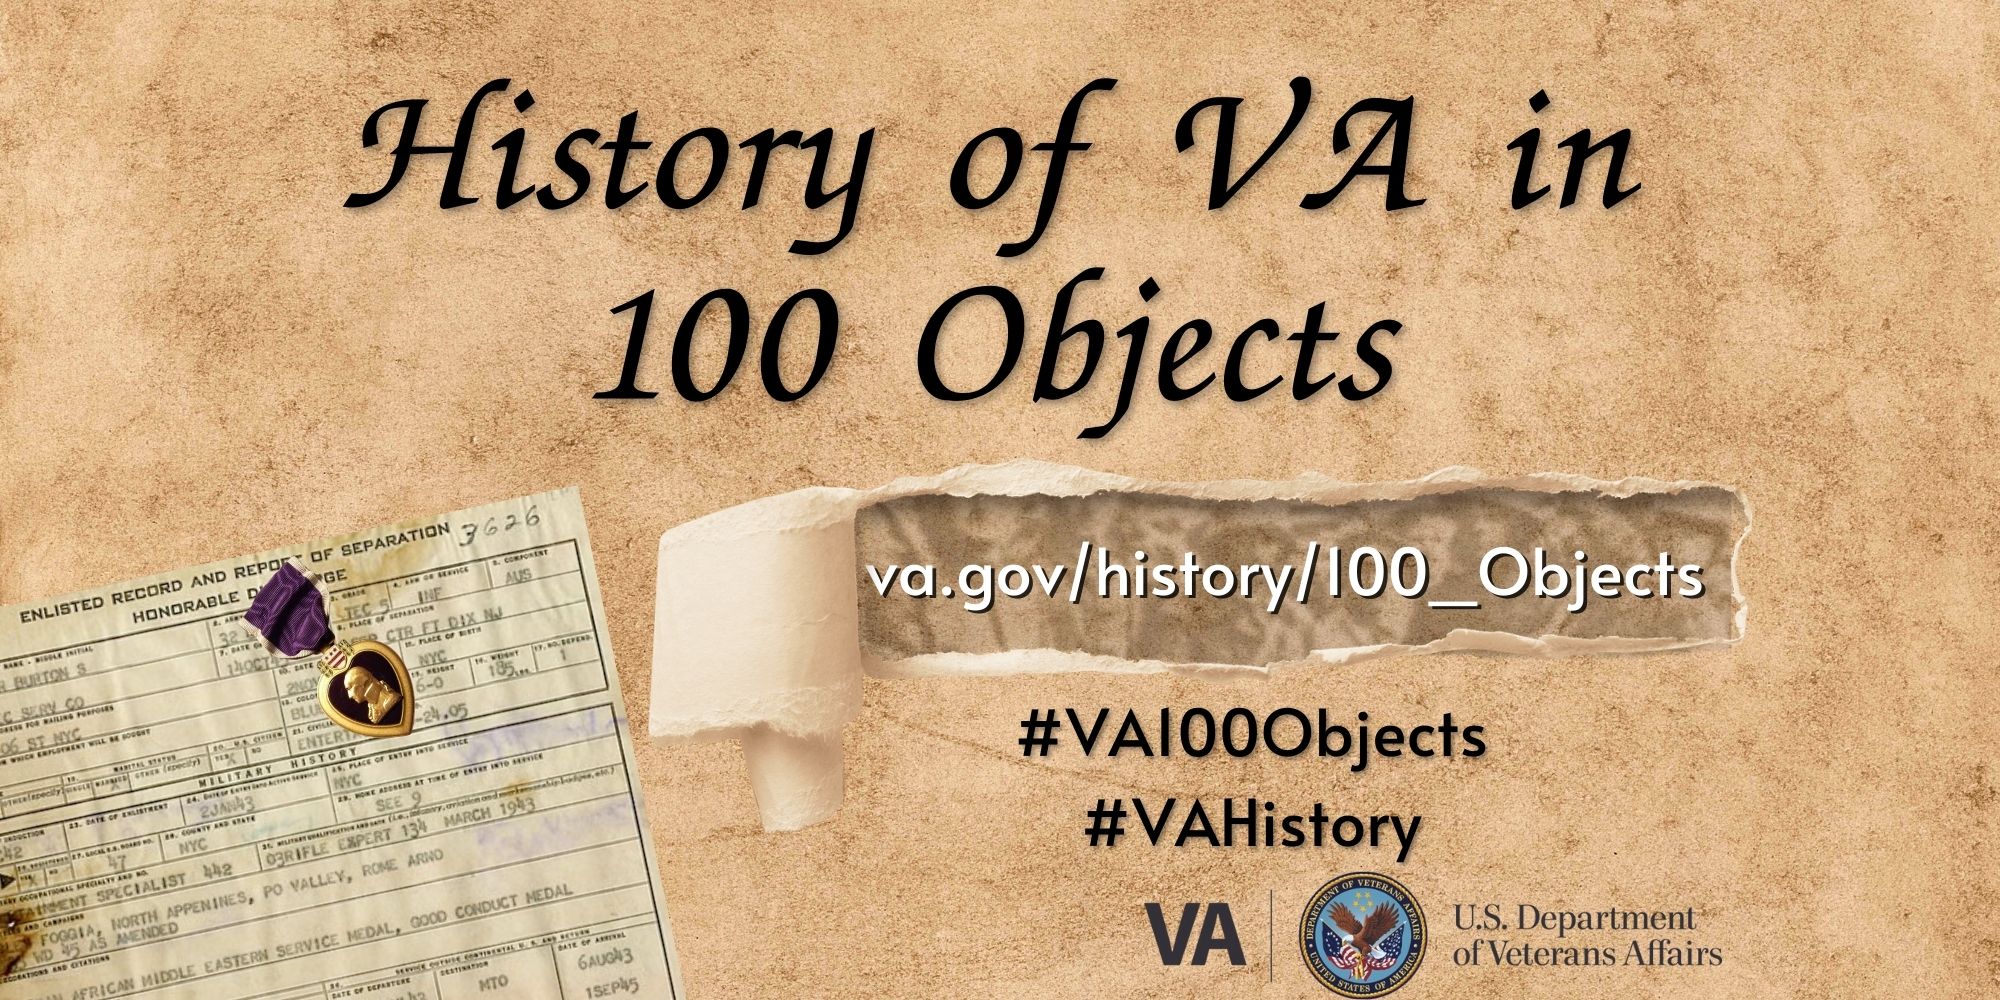 The History of VA in 100 Objects